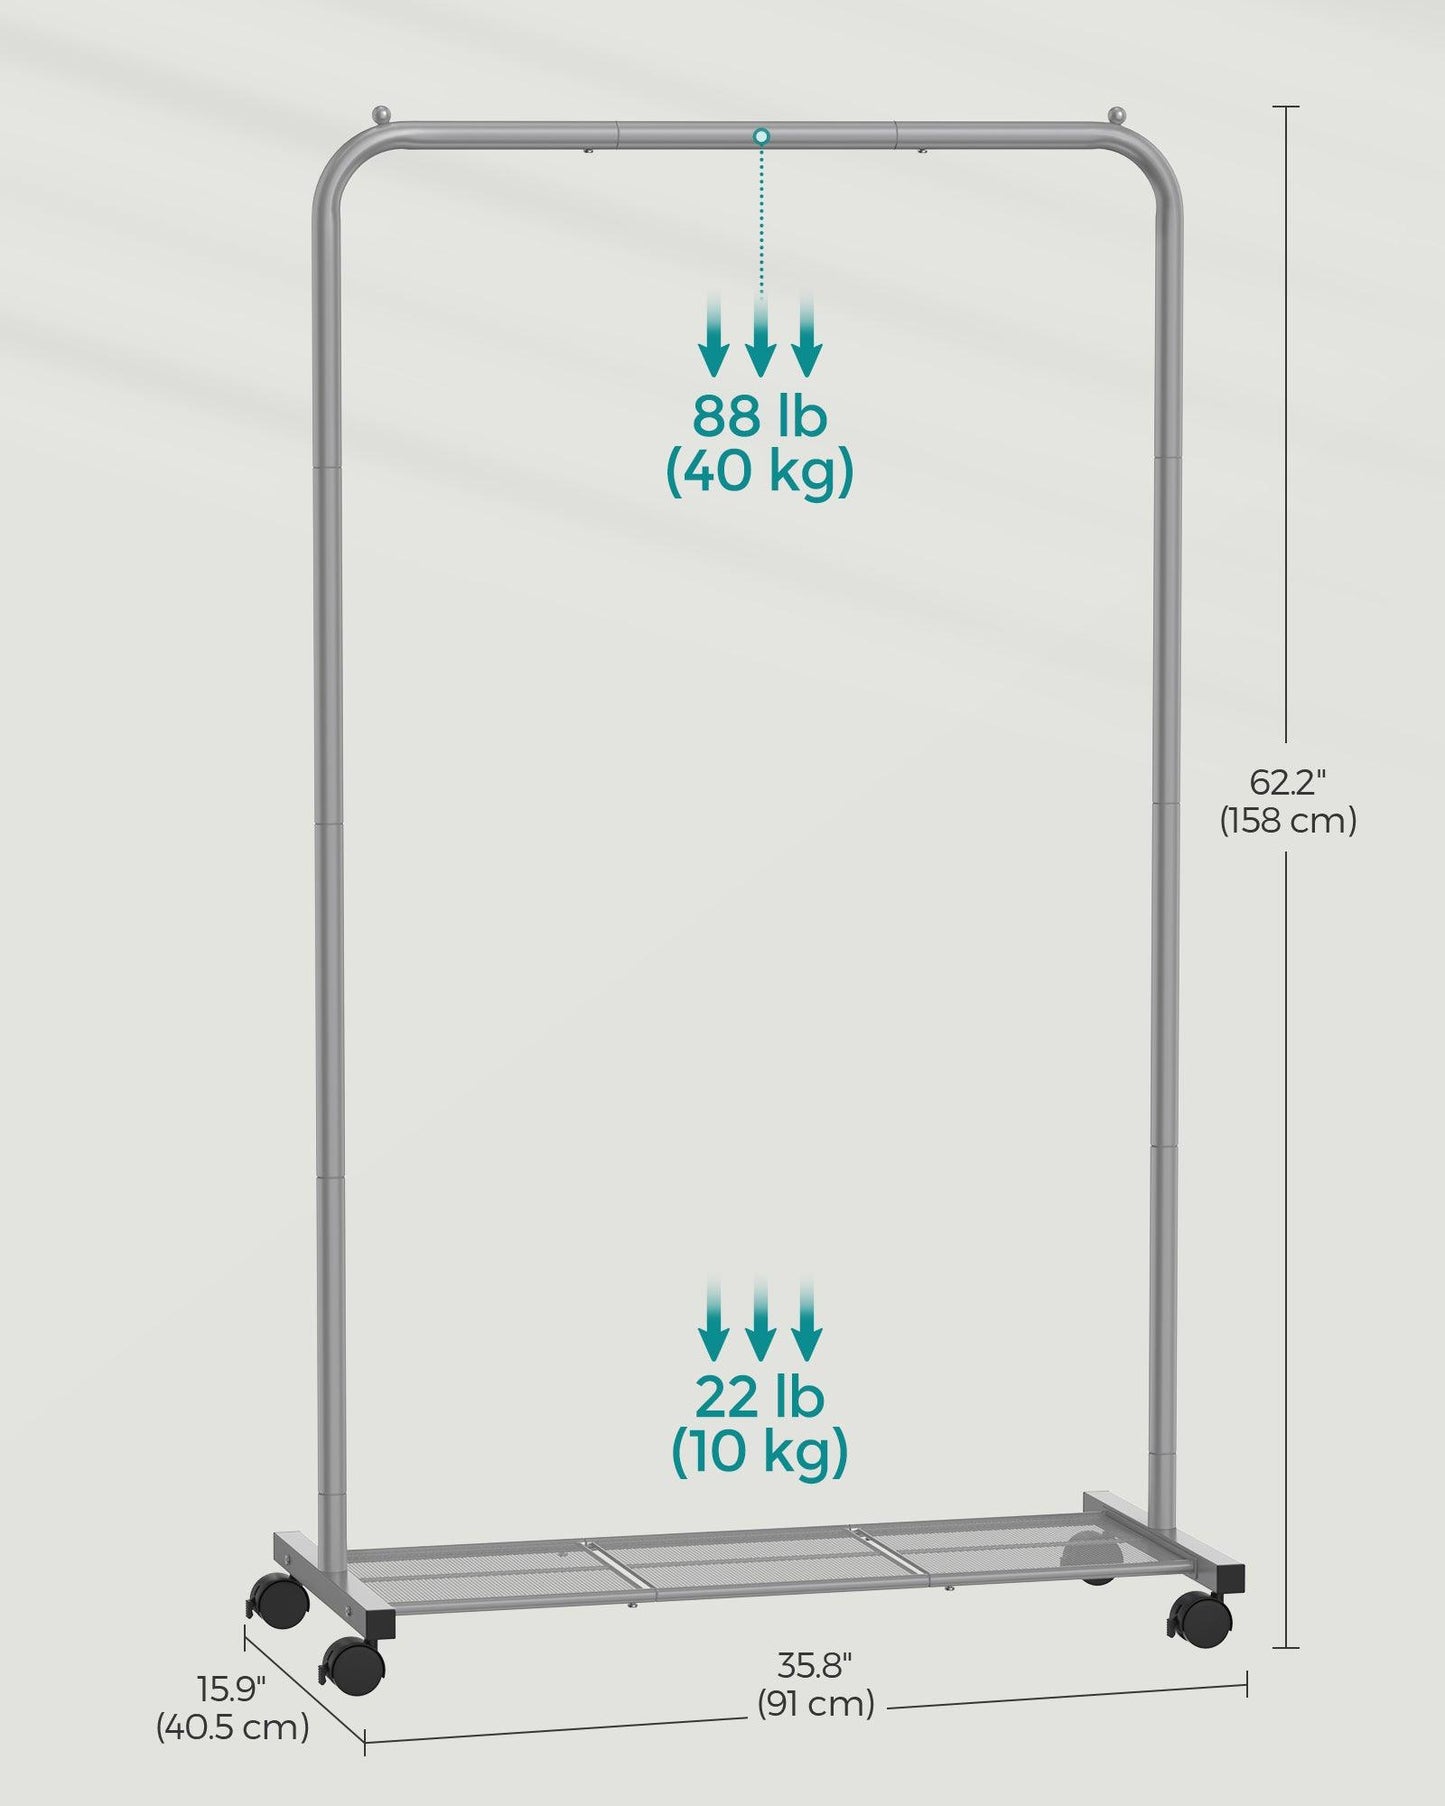 35.8" Wide Clothes Rack on Wheels Slate Gray